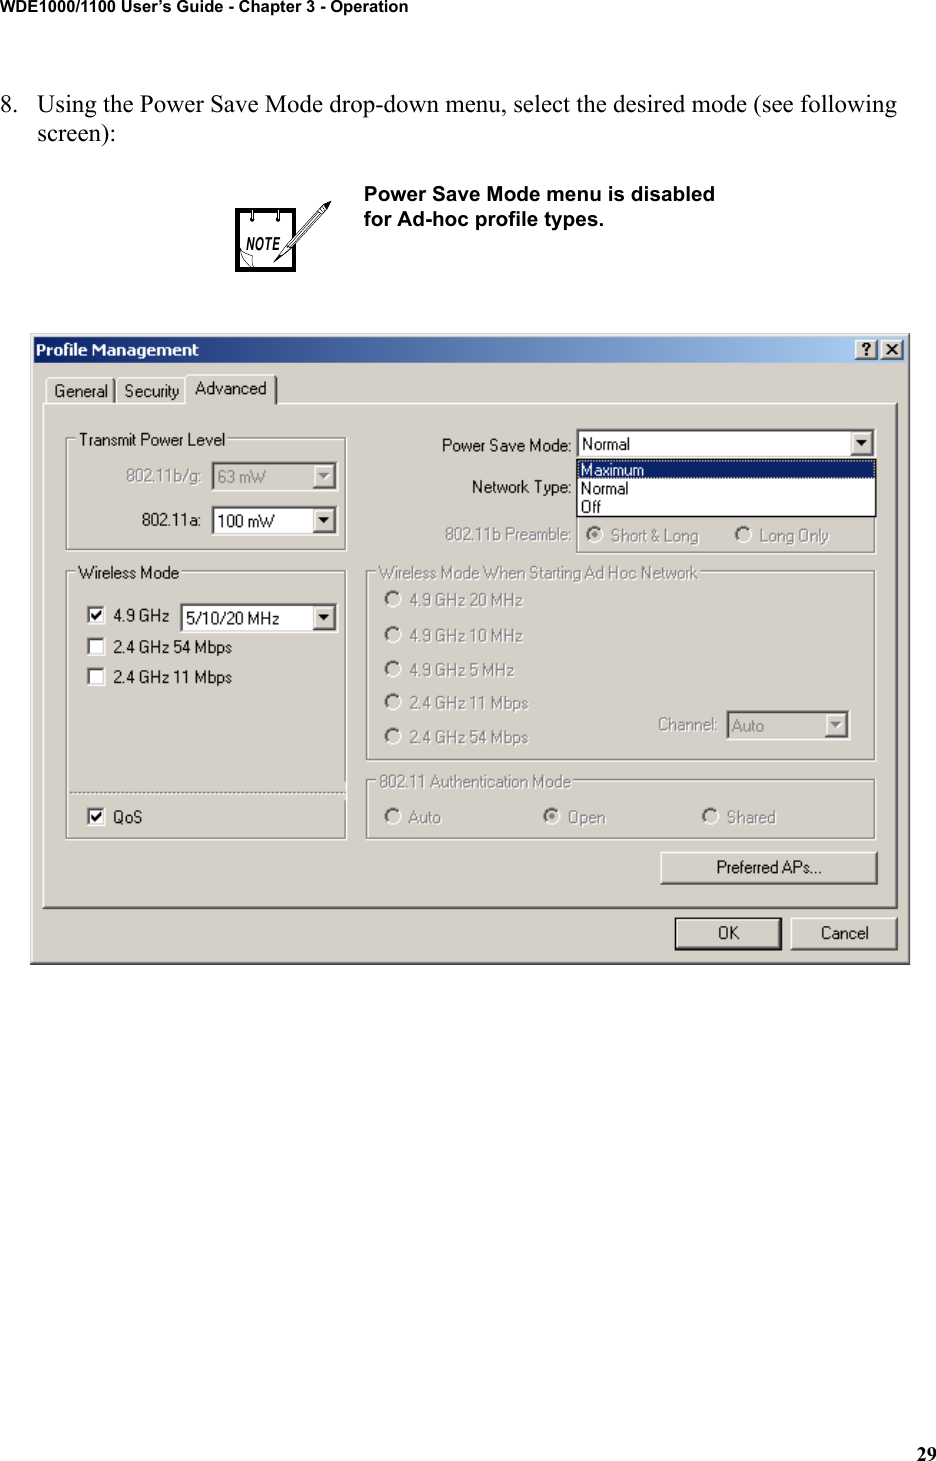 29WDE1000/1100 User’s Guide - Chapter 3 - Operation8. Using the Power Save Mode drop-down menu, select the desired mode (see following screen):Power Save Mode menu is disabled for Ad-hoc profile types.NOTE